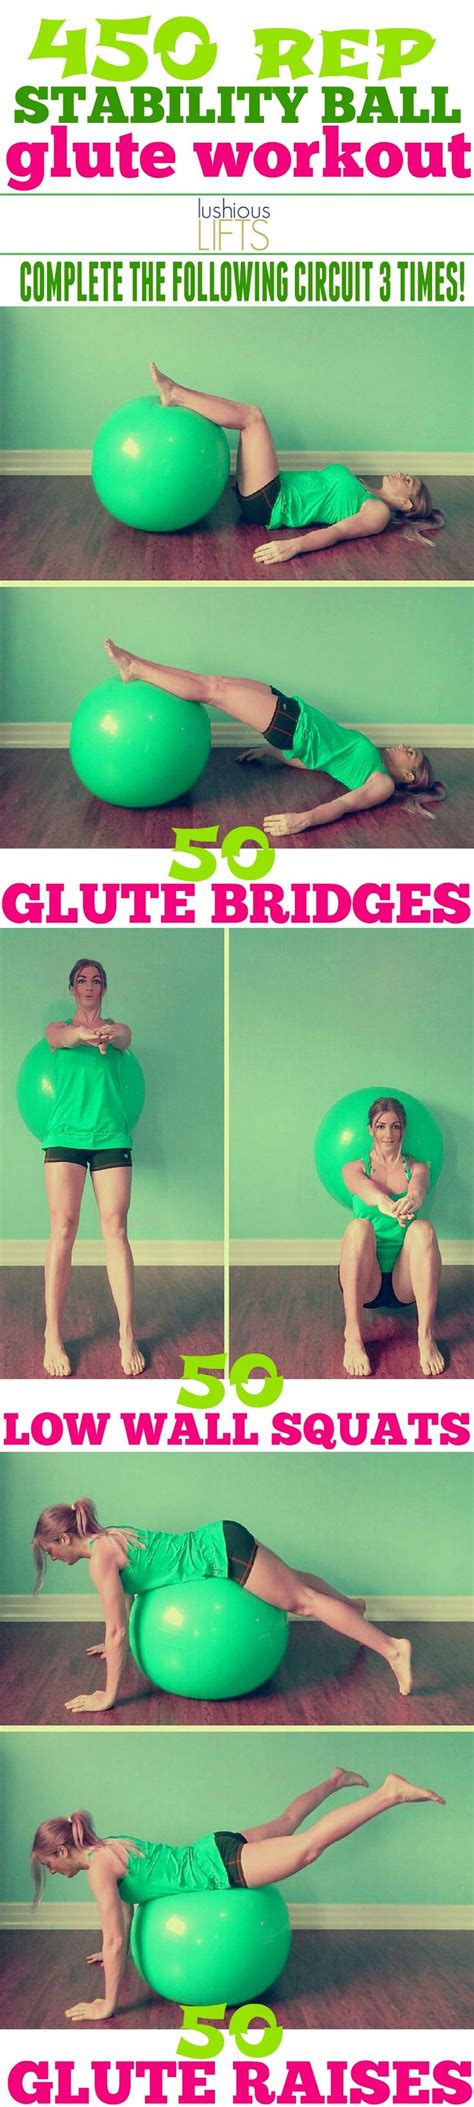 450 Rep Stability Ball Glute Workout Get Those Glutes On Fire ⋆ Pinpoint